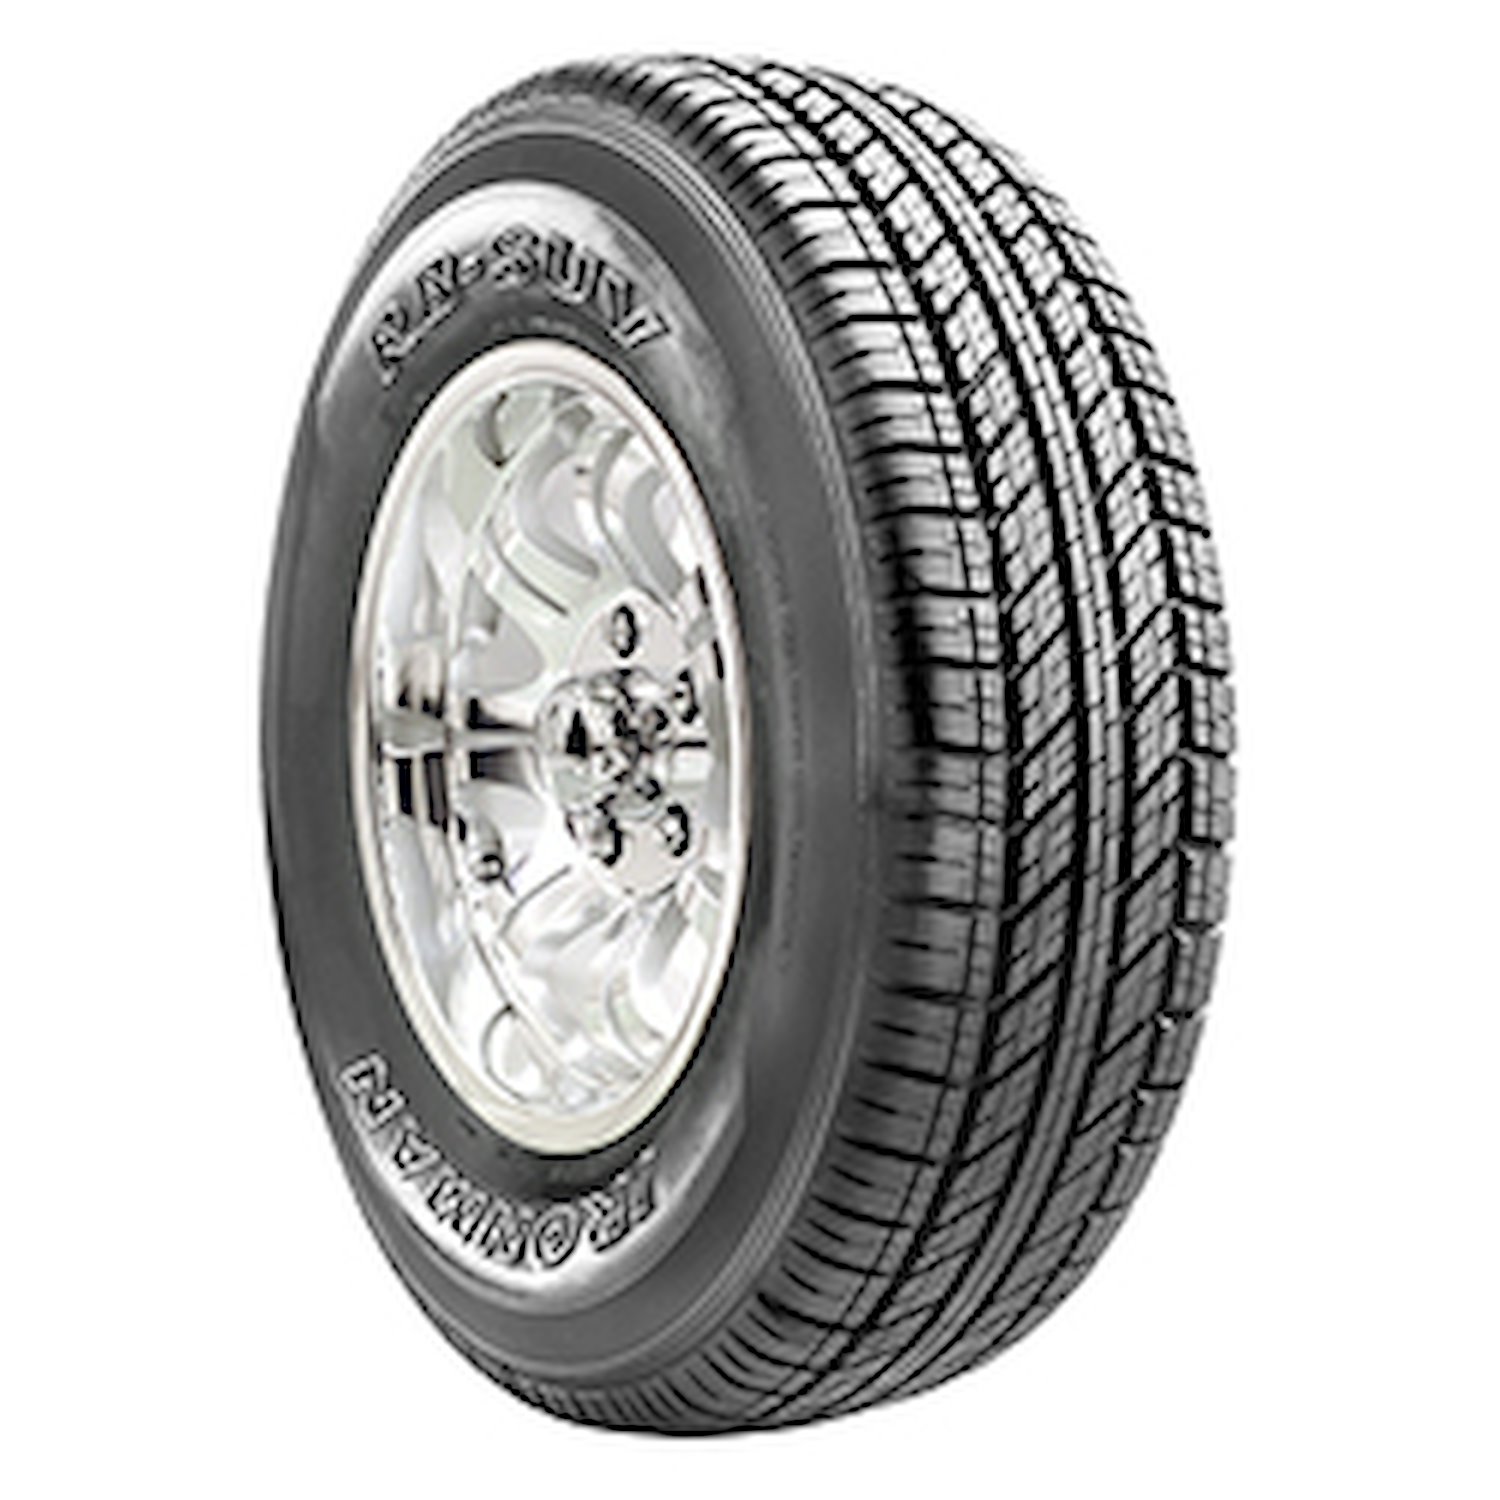 RB SUV Tire, 235/65R18 106H